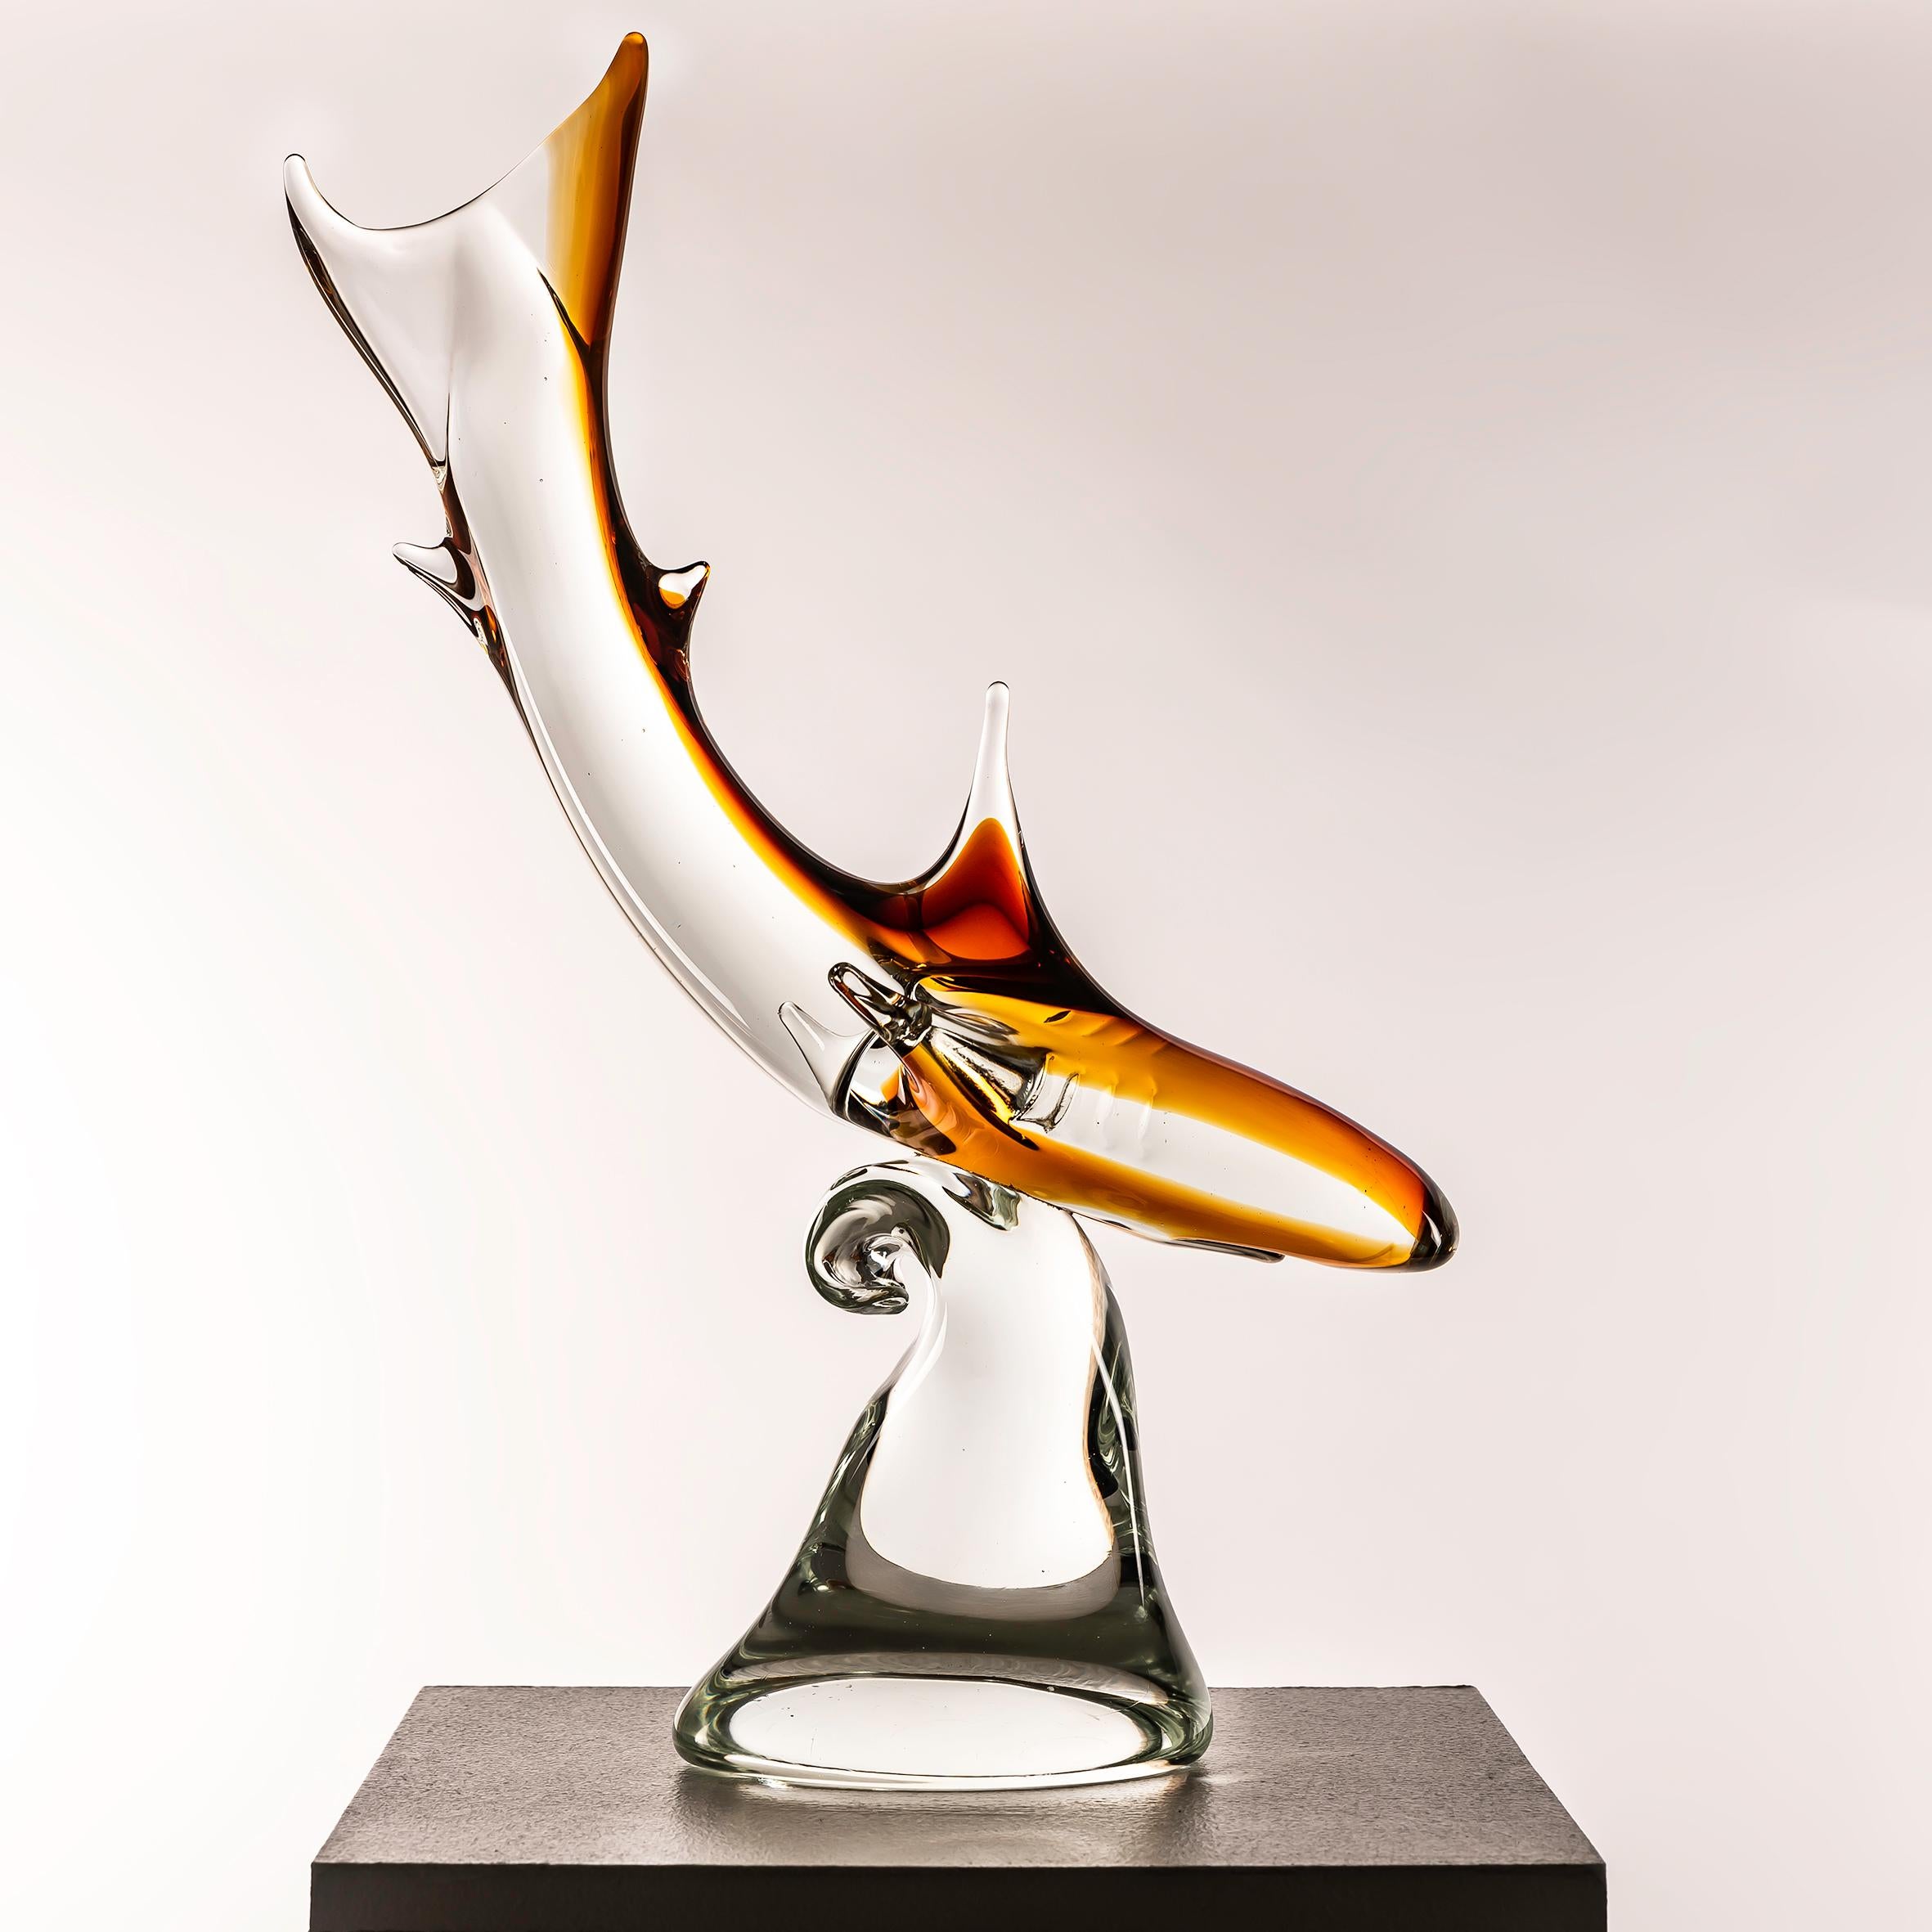 This Murano Glass Shark Sculpture from the 1960s, crafted with vibrant orange and clear glass, offers a compelling blend of artistic mastery and aesthetic appeal. Renowned for its centuries-old tradition of glassmaking excellence, Murano artisans